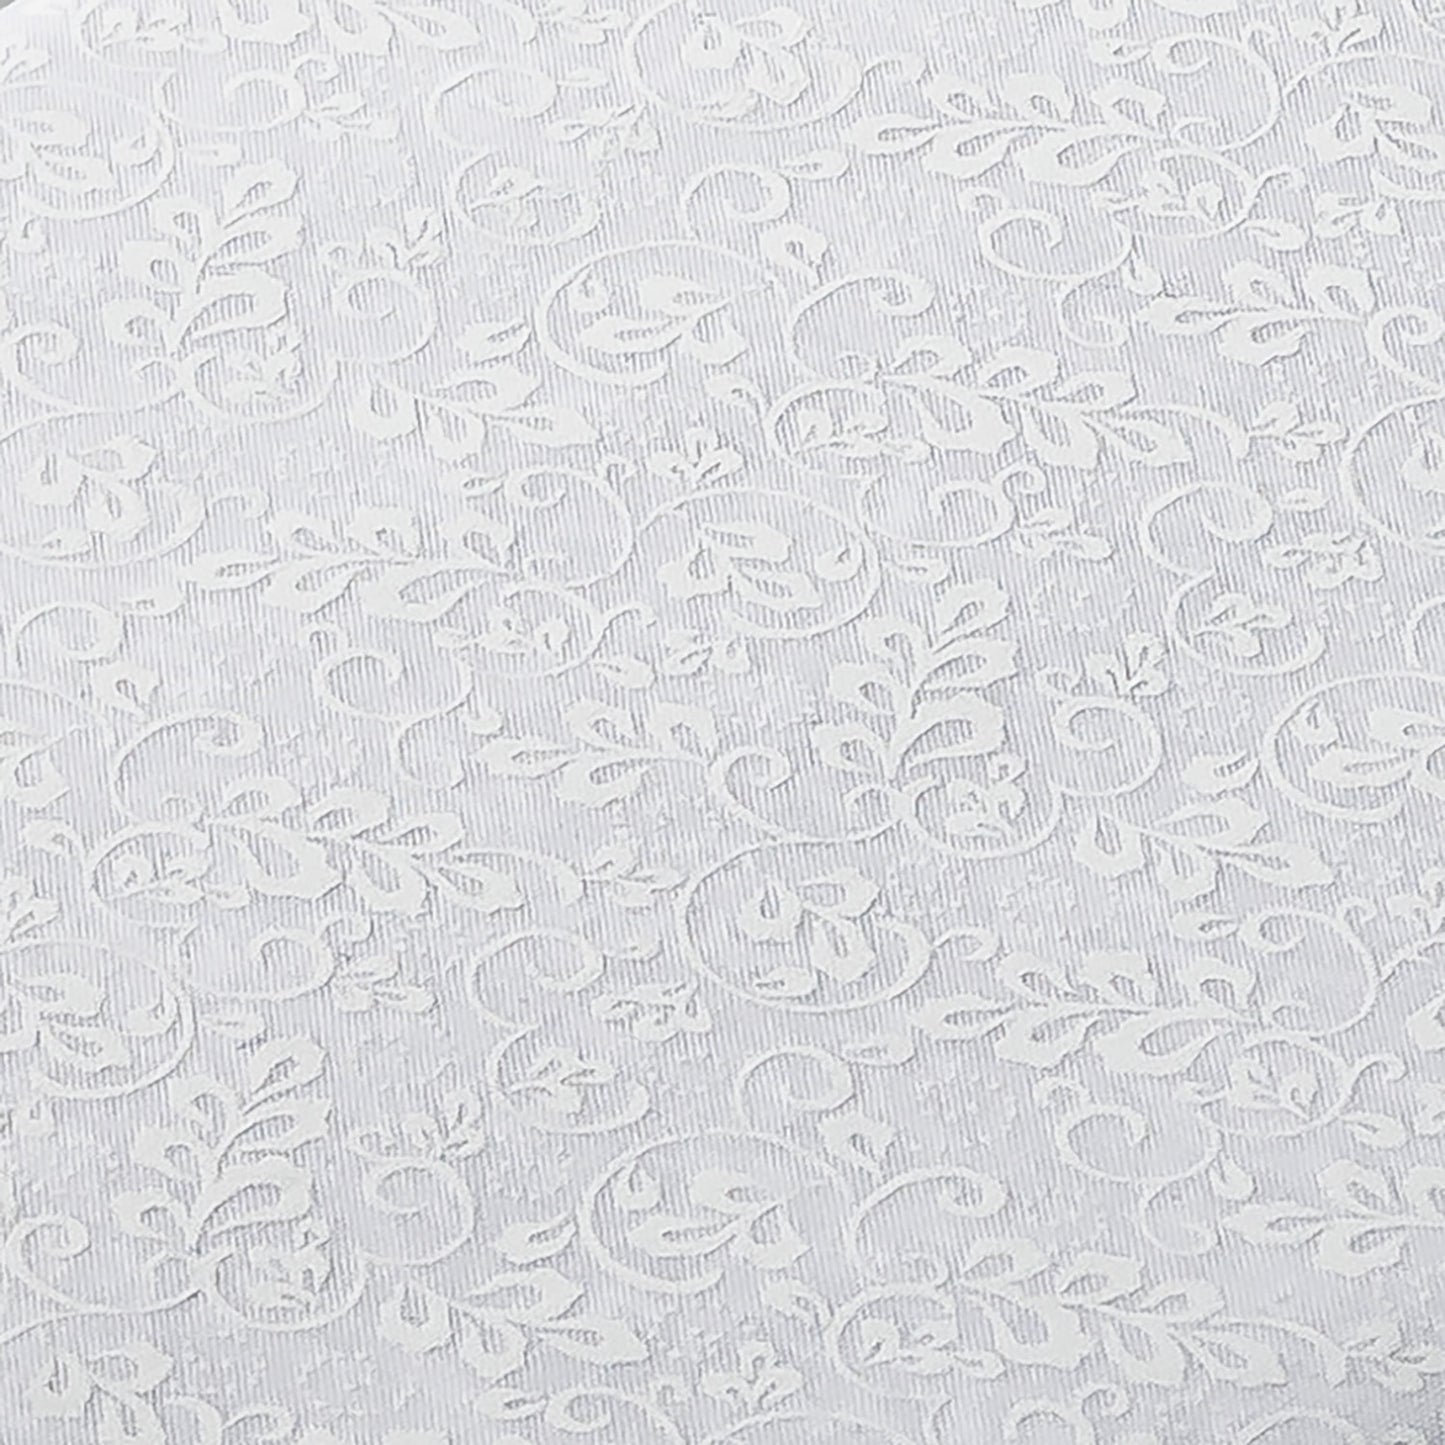 Wilmington Essentials - Leaf and Scroll White on White 10 Yard Bolt Alternative View #1